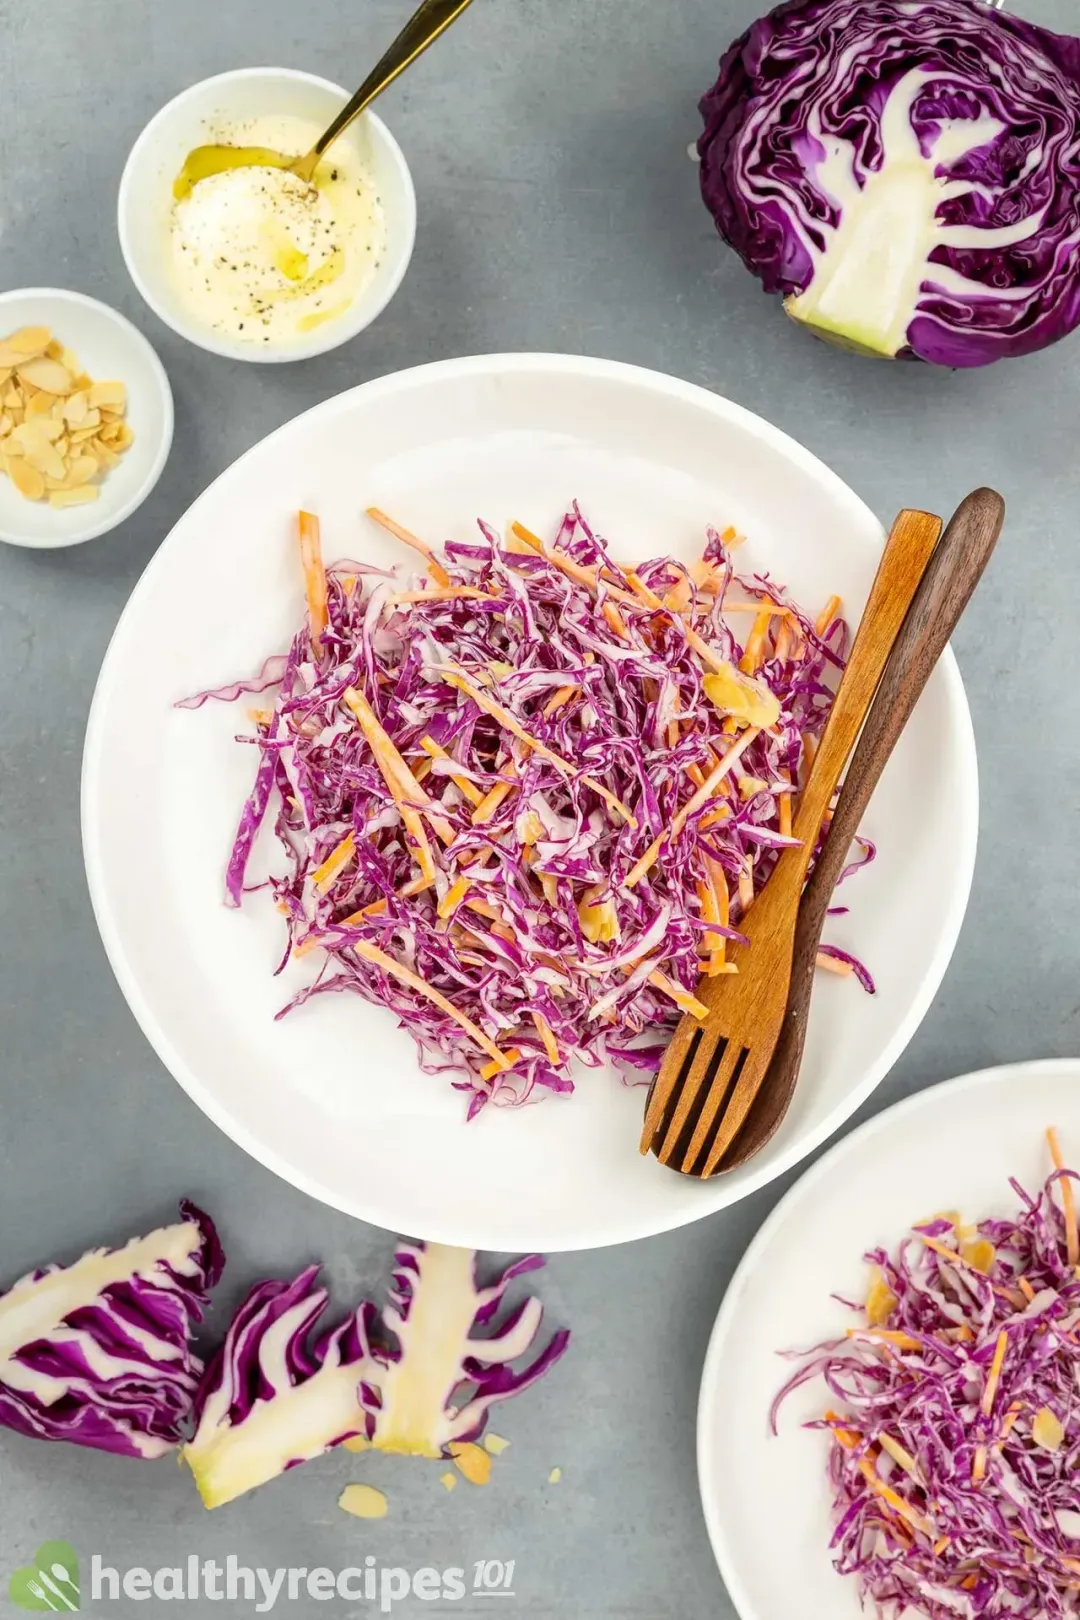 Homemade Red Cabbage Salad Recipe